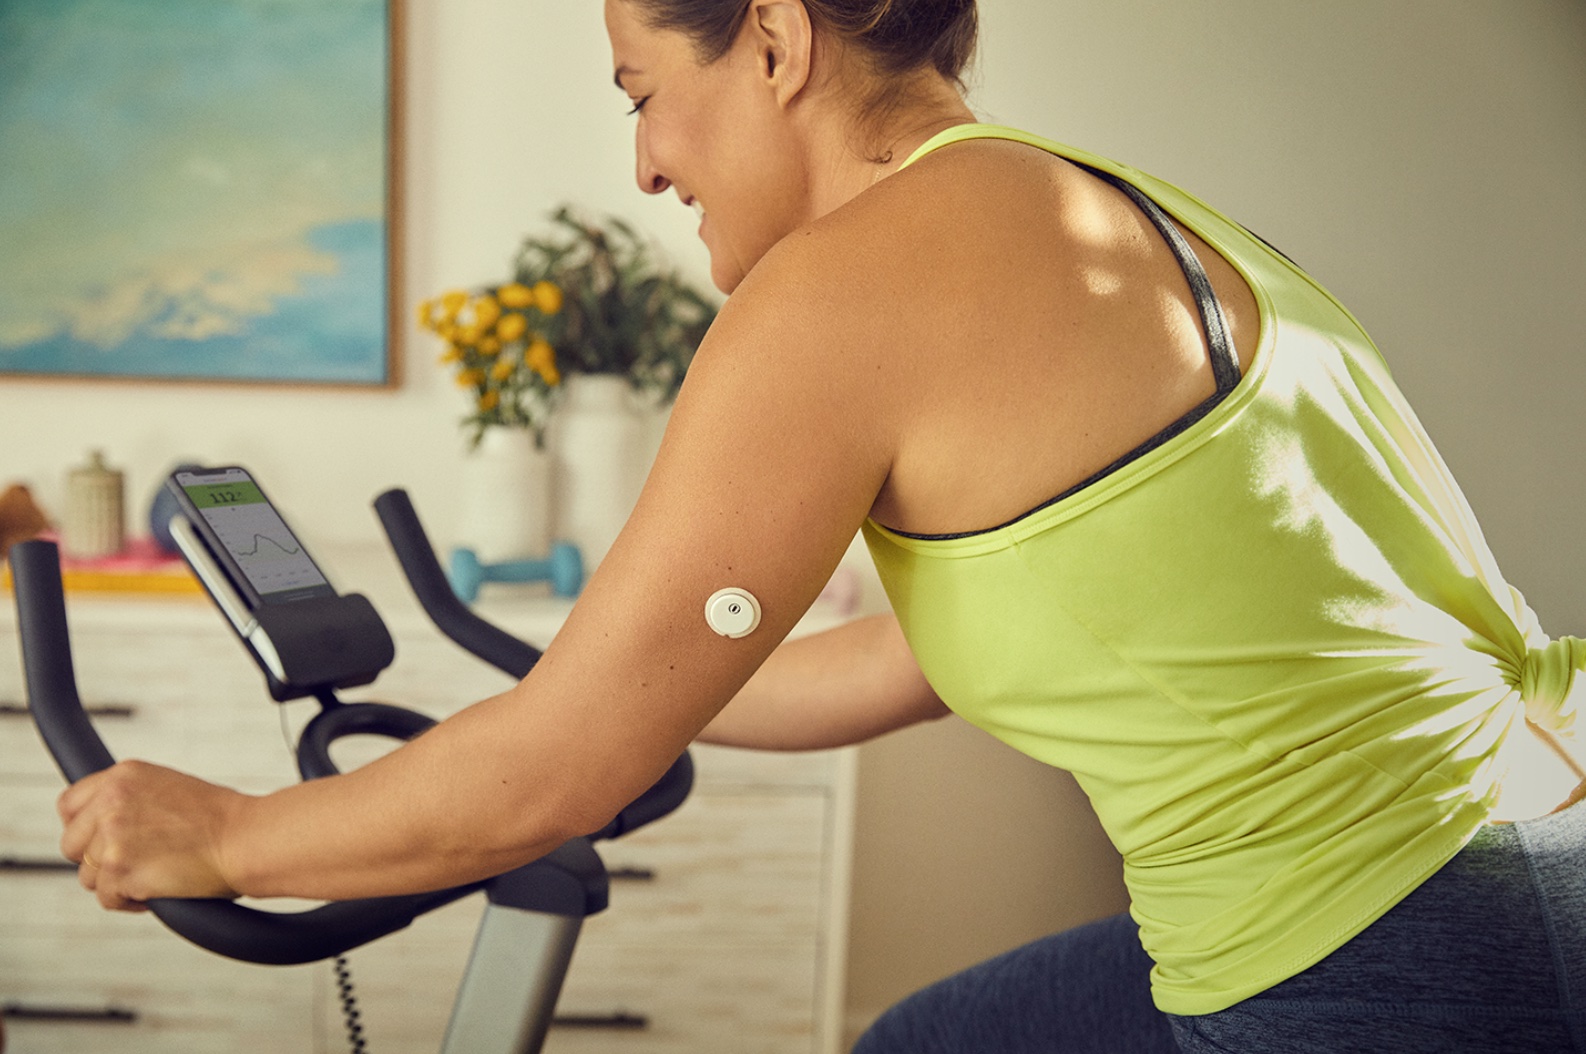 Woman on stationary bike wearing Freestyle Libre 3 CGM